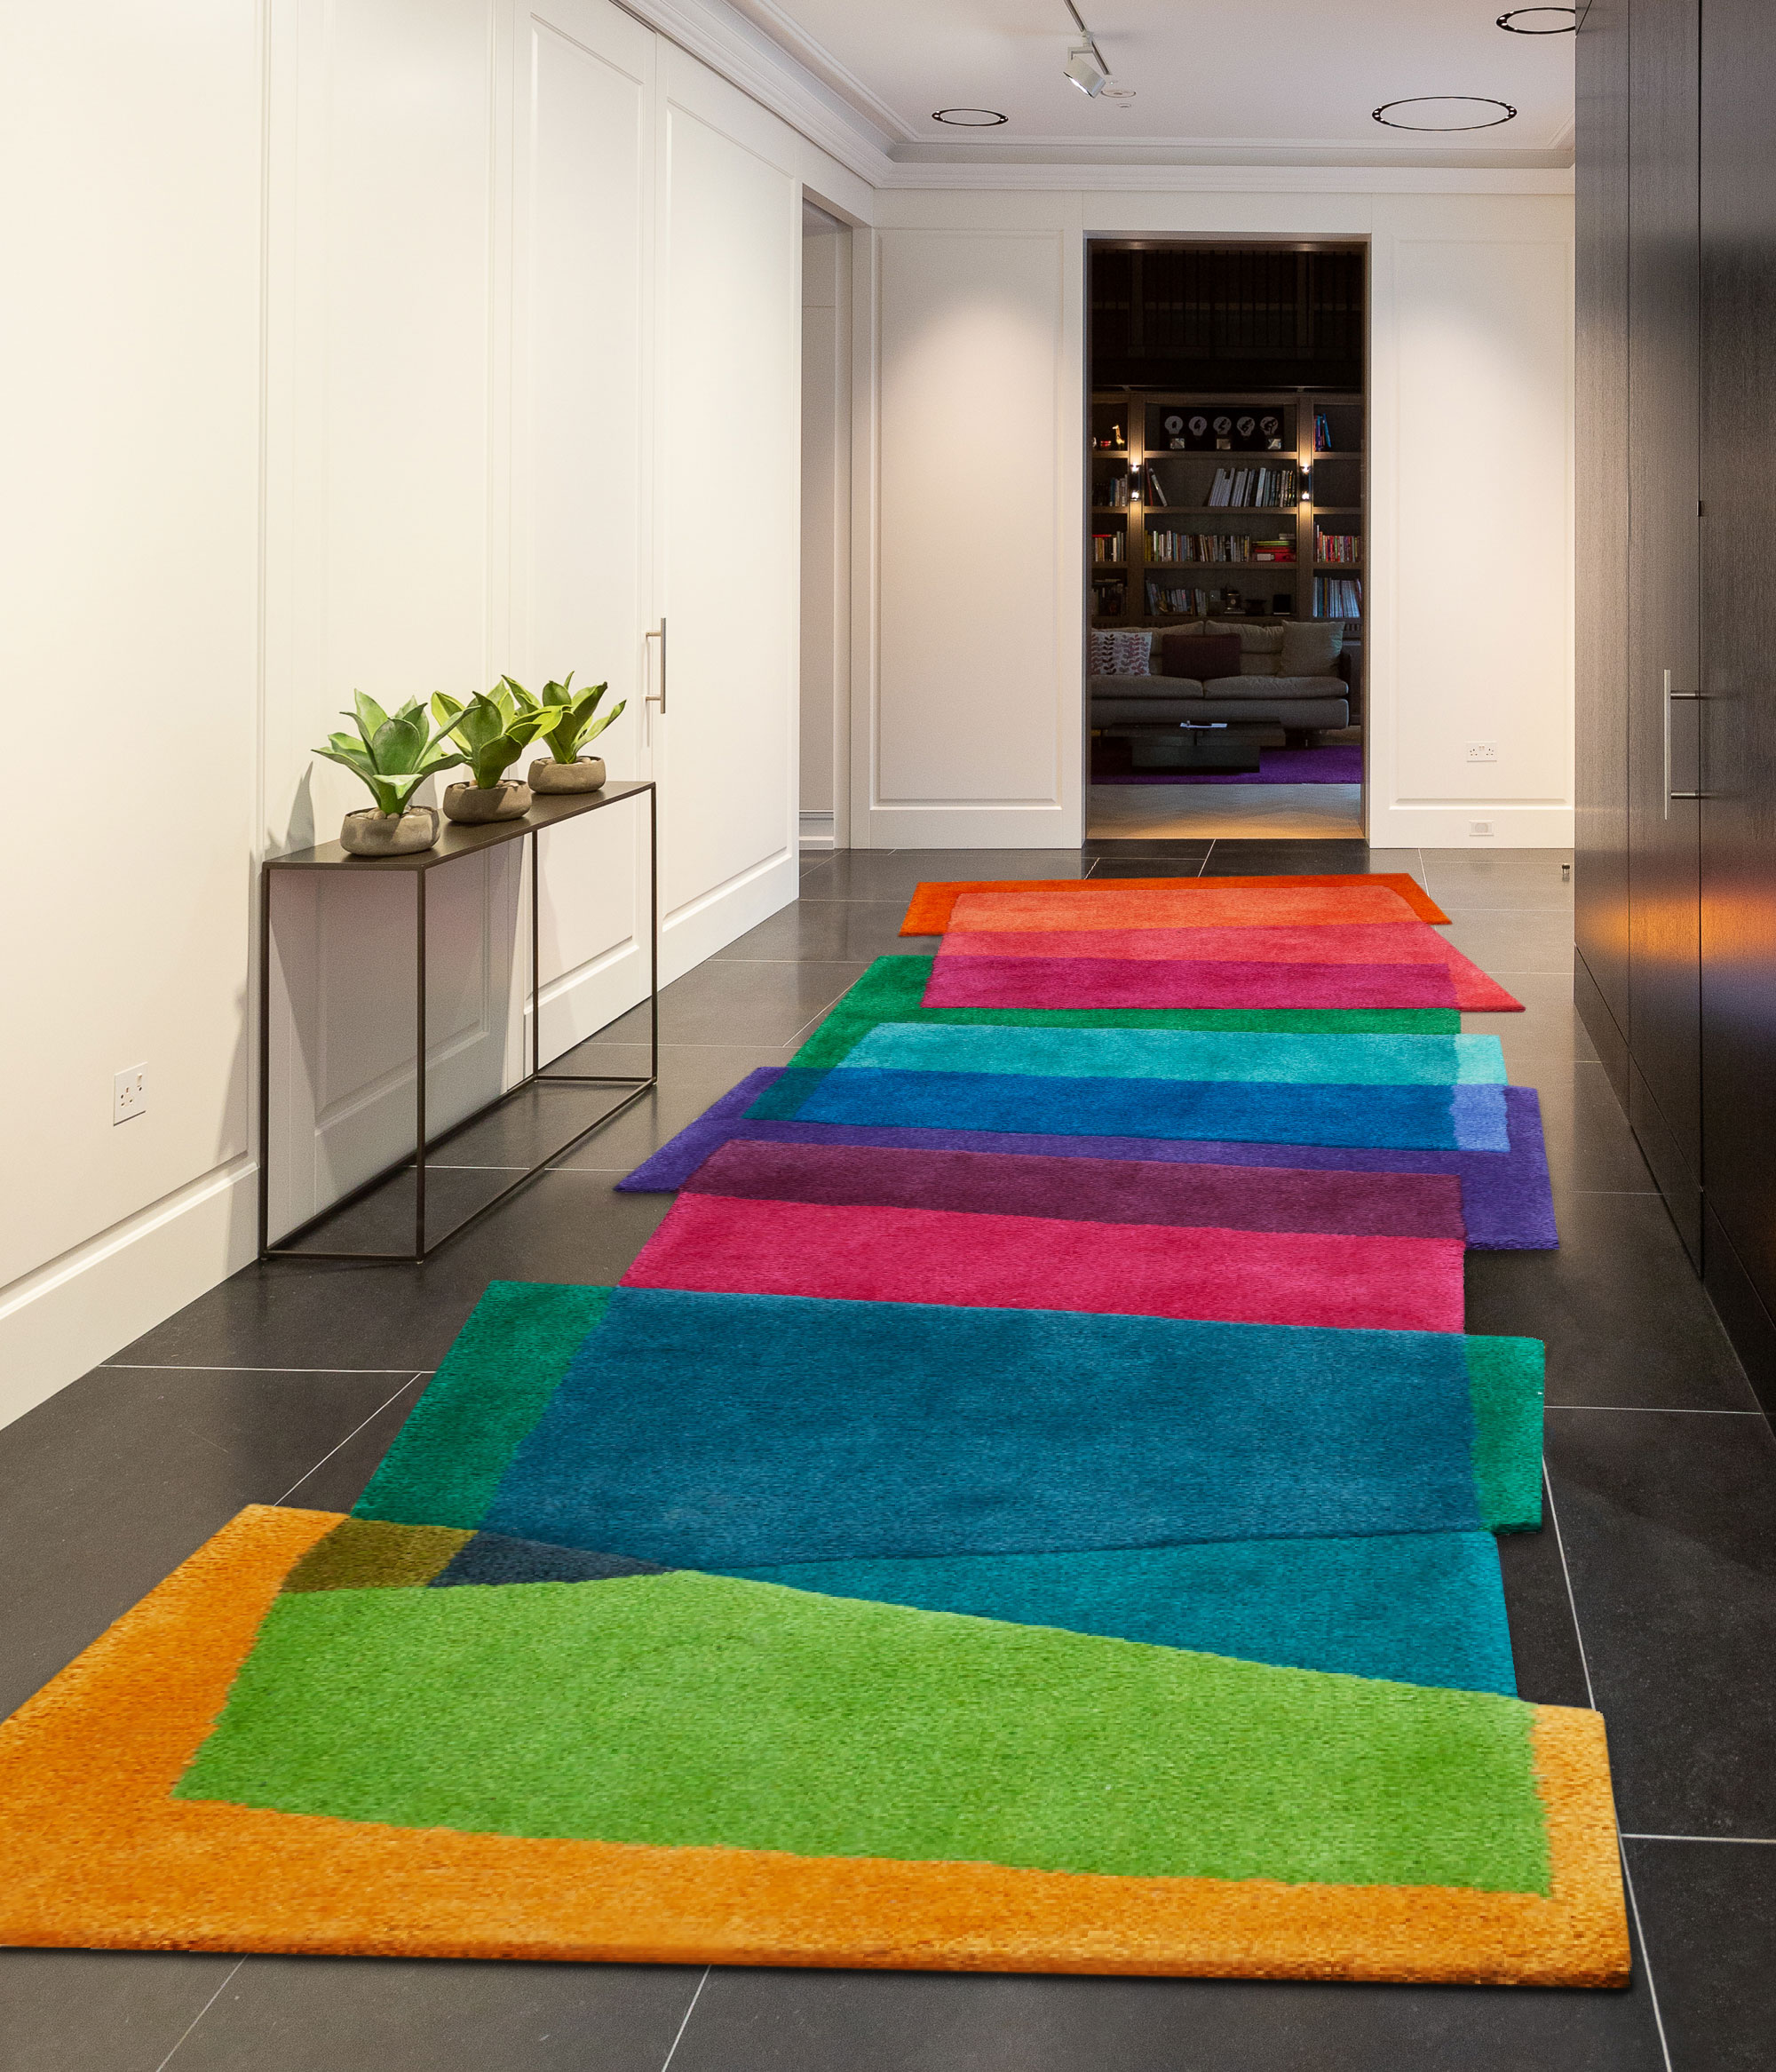 How to choose the best runner rug for your hallway